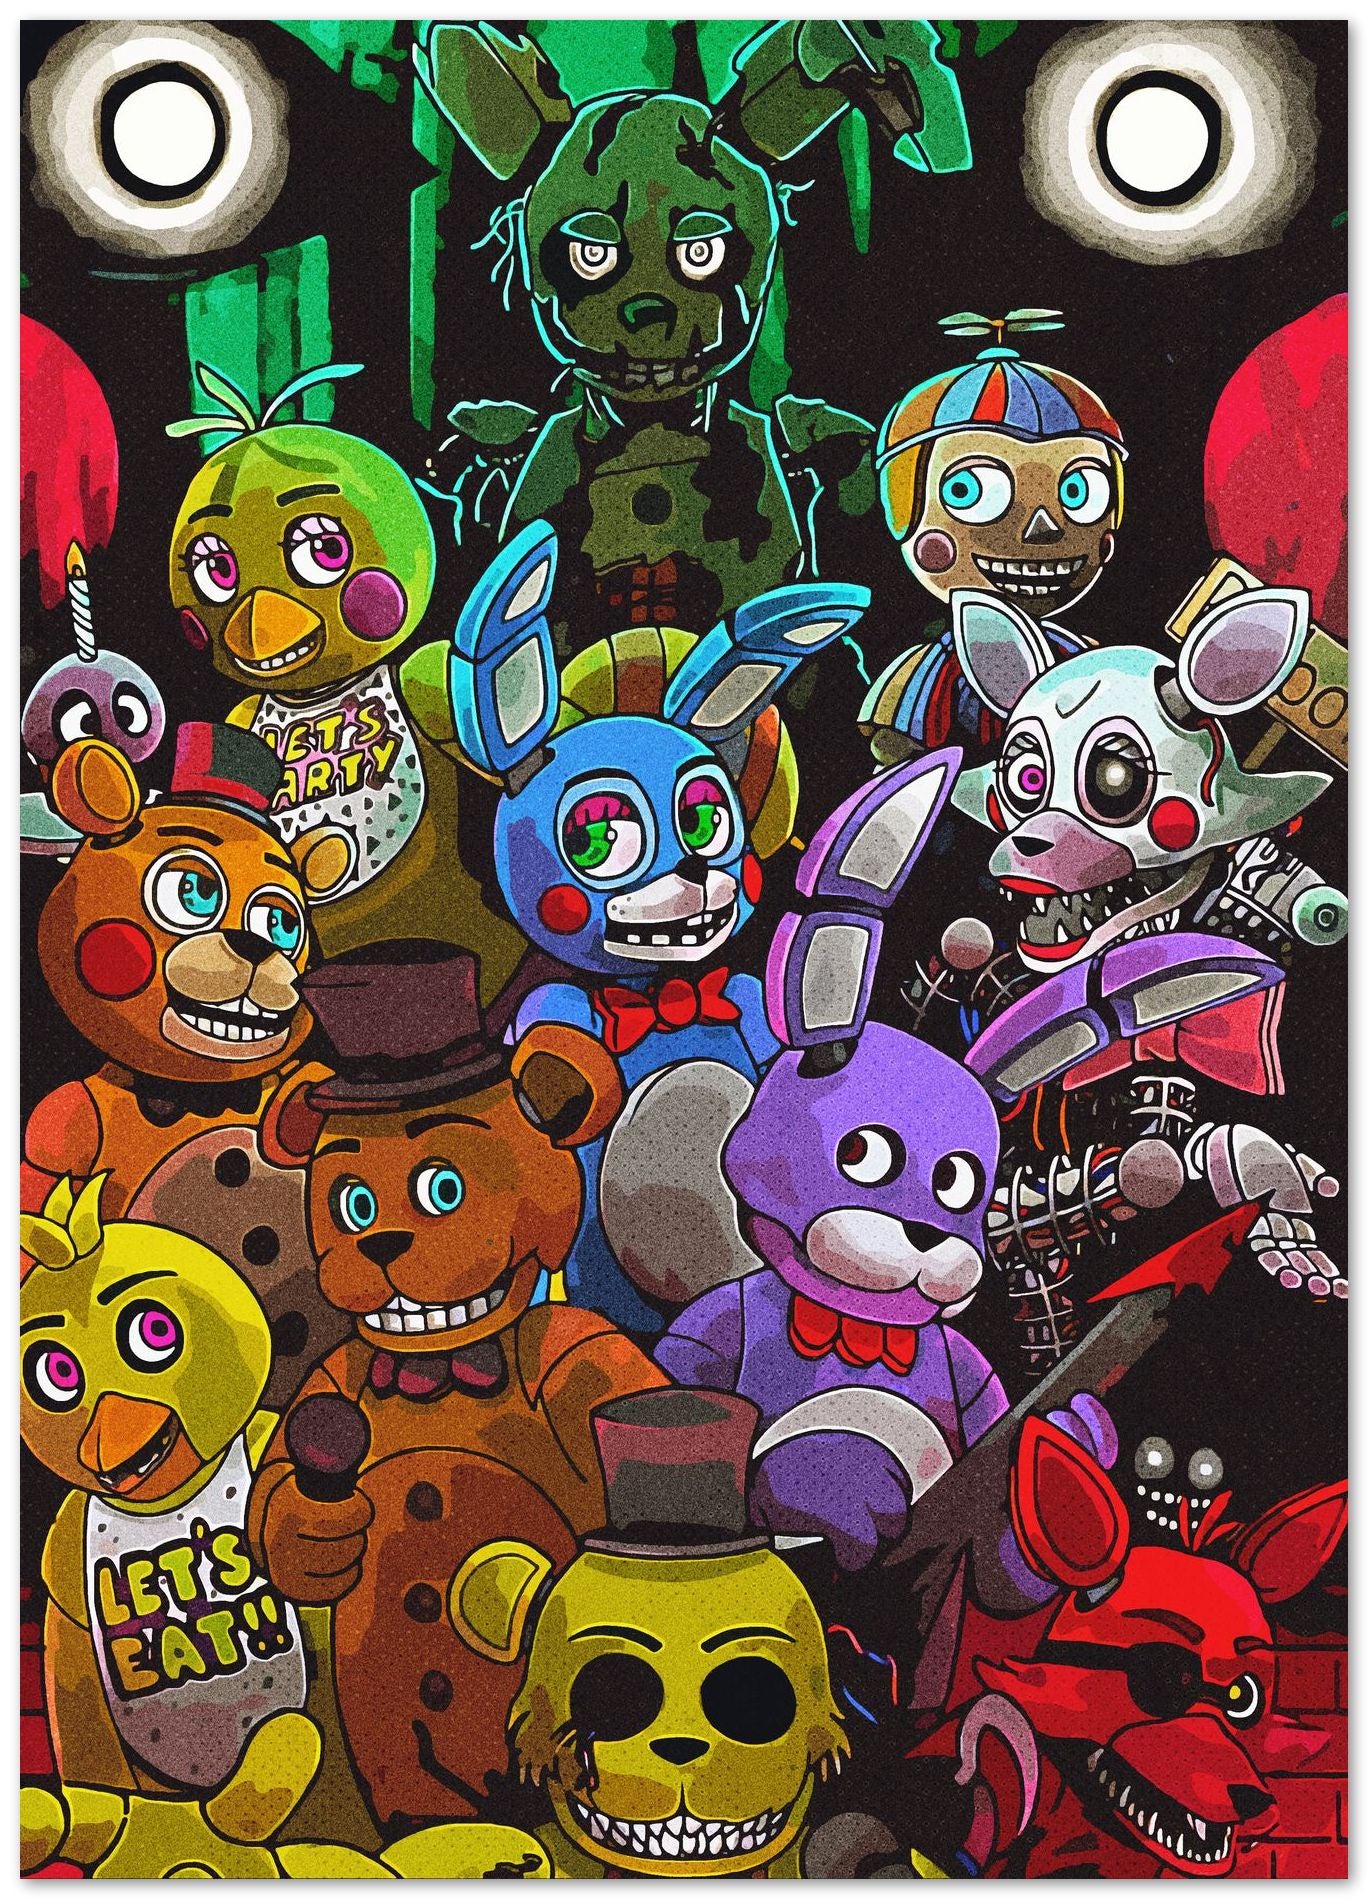 Five Nights at Freddy's - @ArtStyle